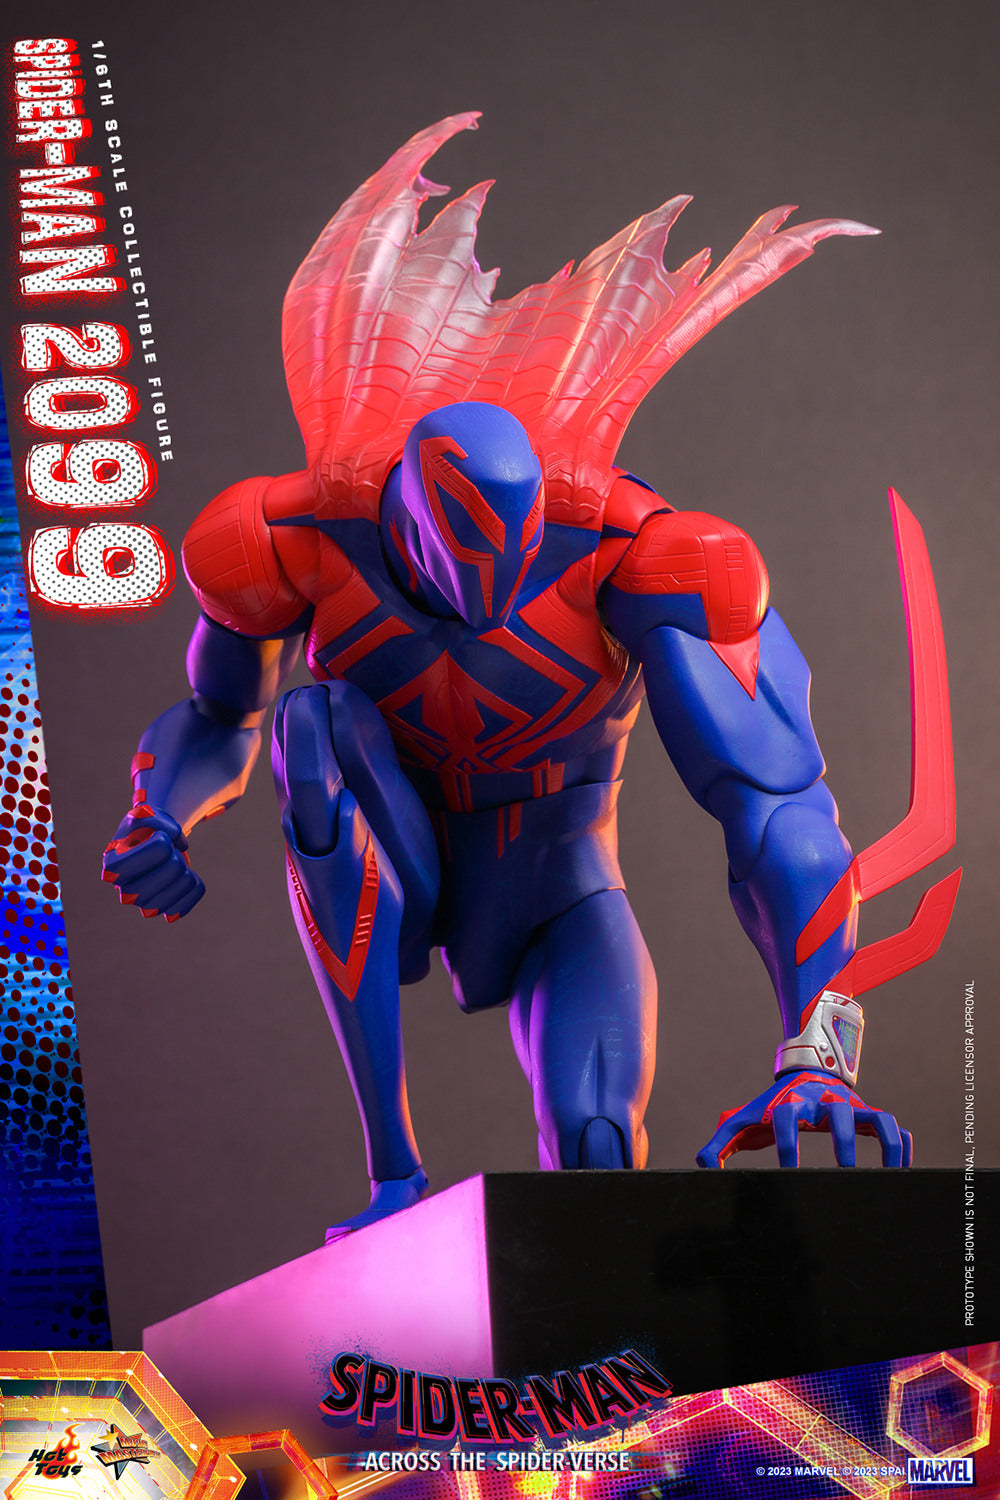 Hot Toys W.E.B. of Spider-Man - 1/6th scale Spider-Man Collectible